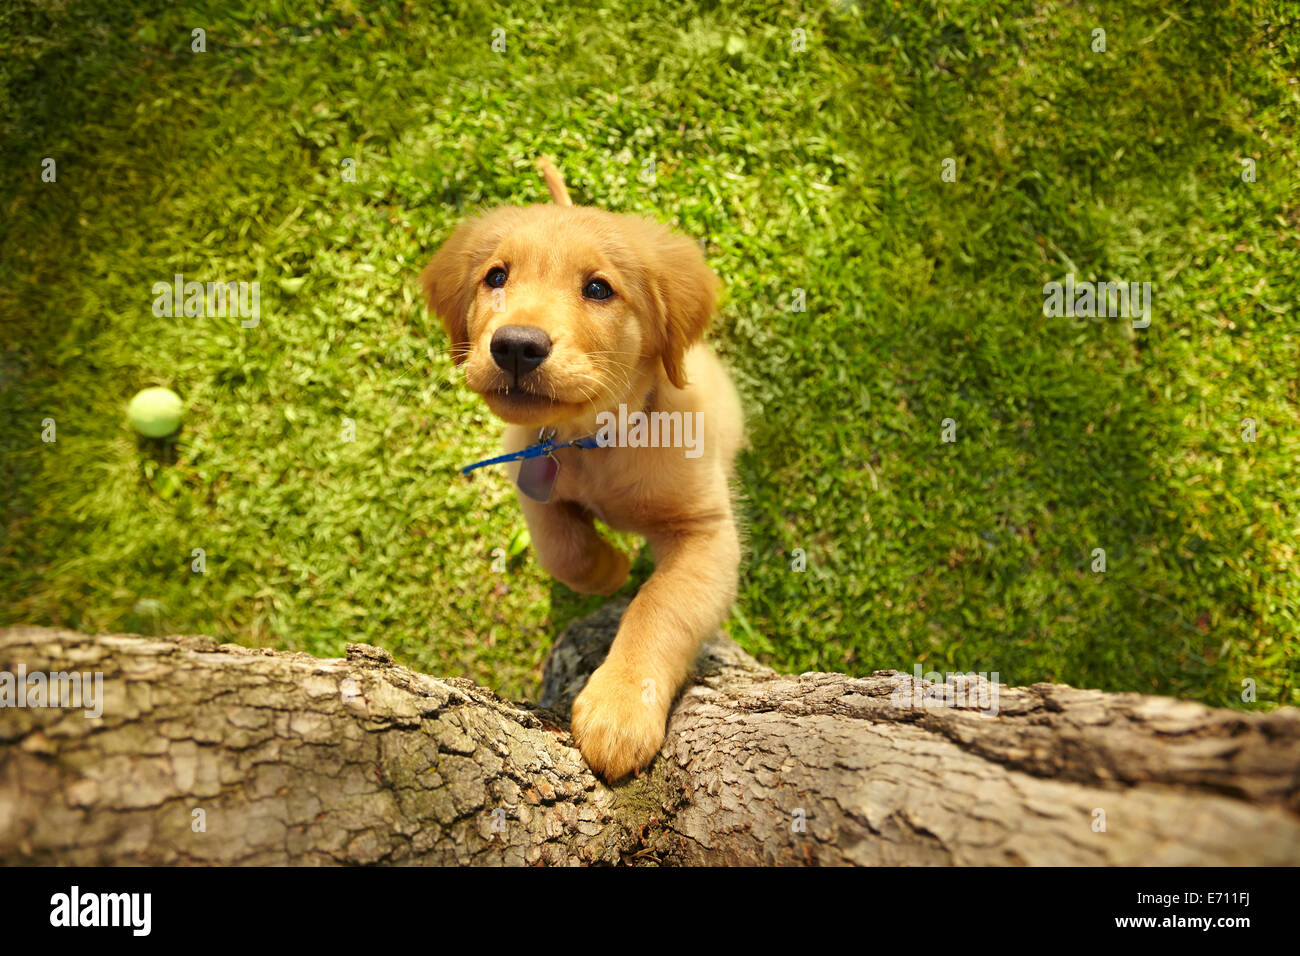 Overhead view curious puppy dog on hind legs looking up tree trunk Stock Photo